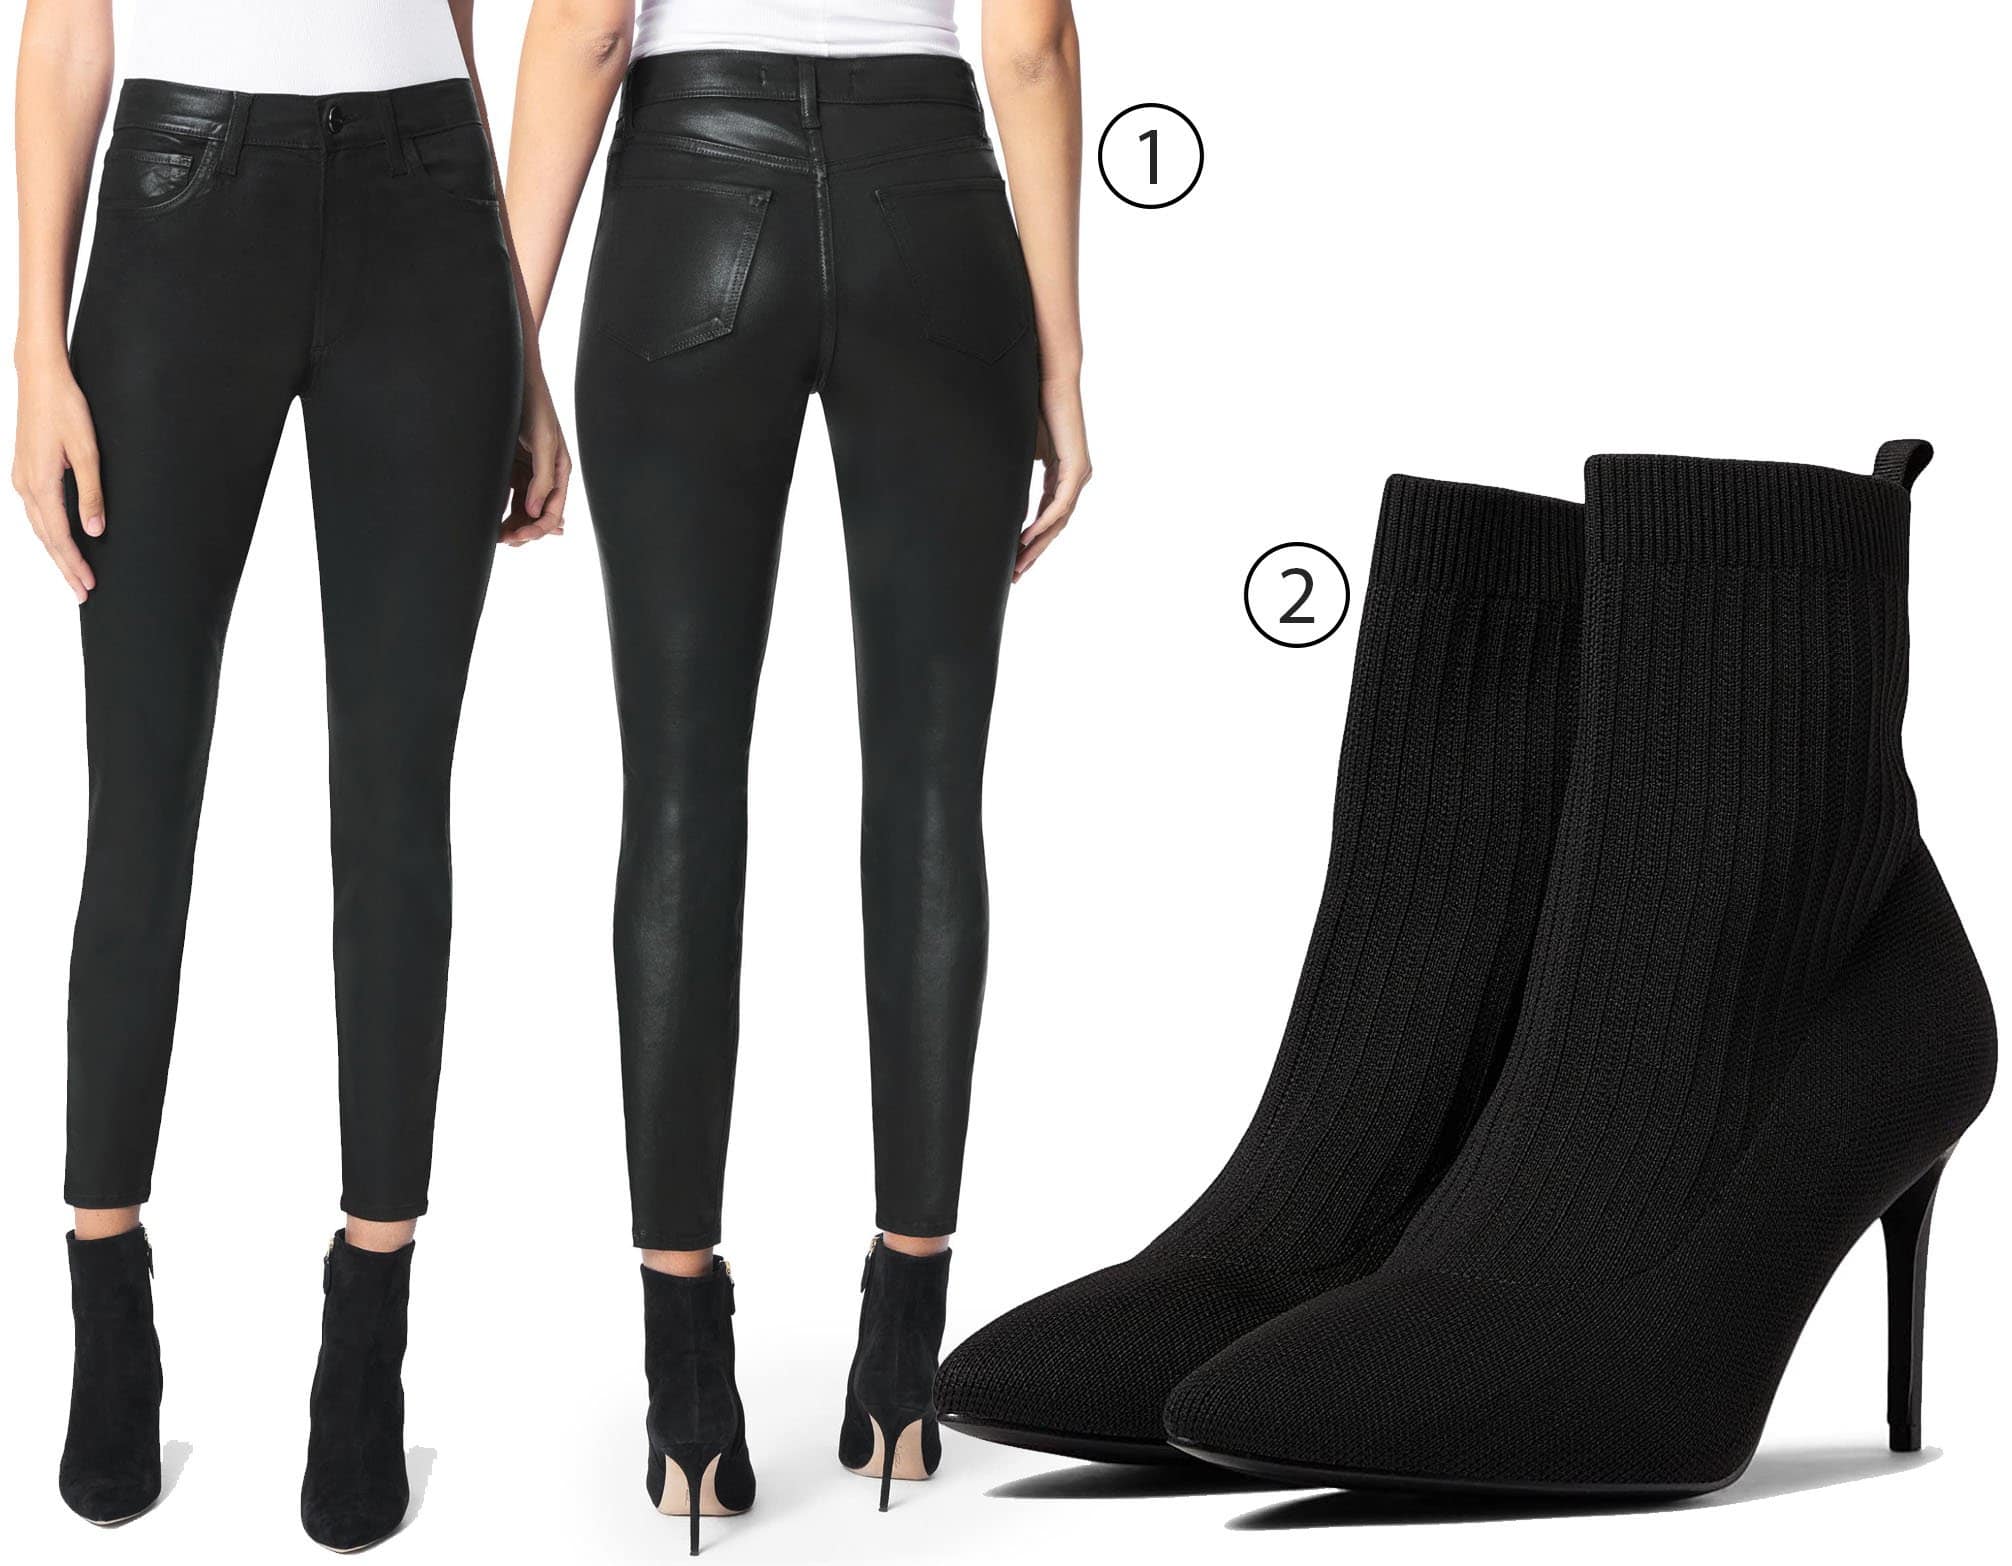 Create a sleek silhouette with Joe's The Charlie Coated Ankle skinny jeans and Chinese Laundry Elba booties, perfect for a night out or a chic day look